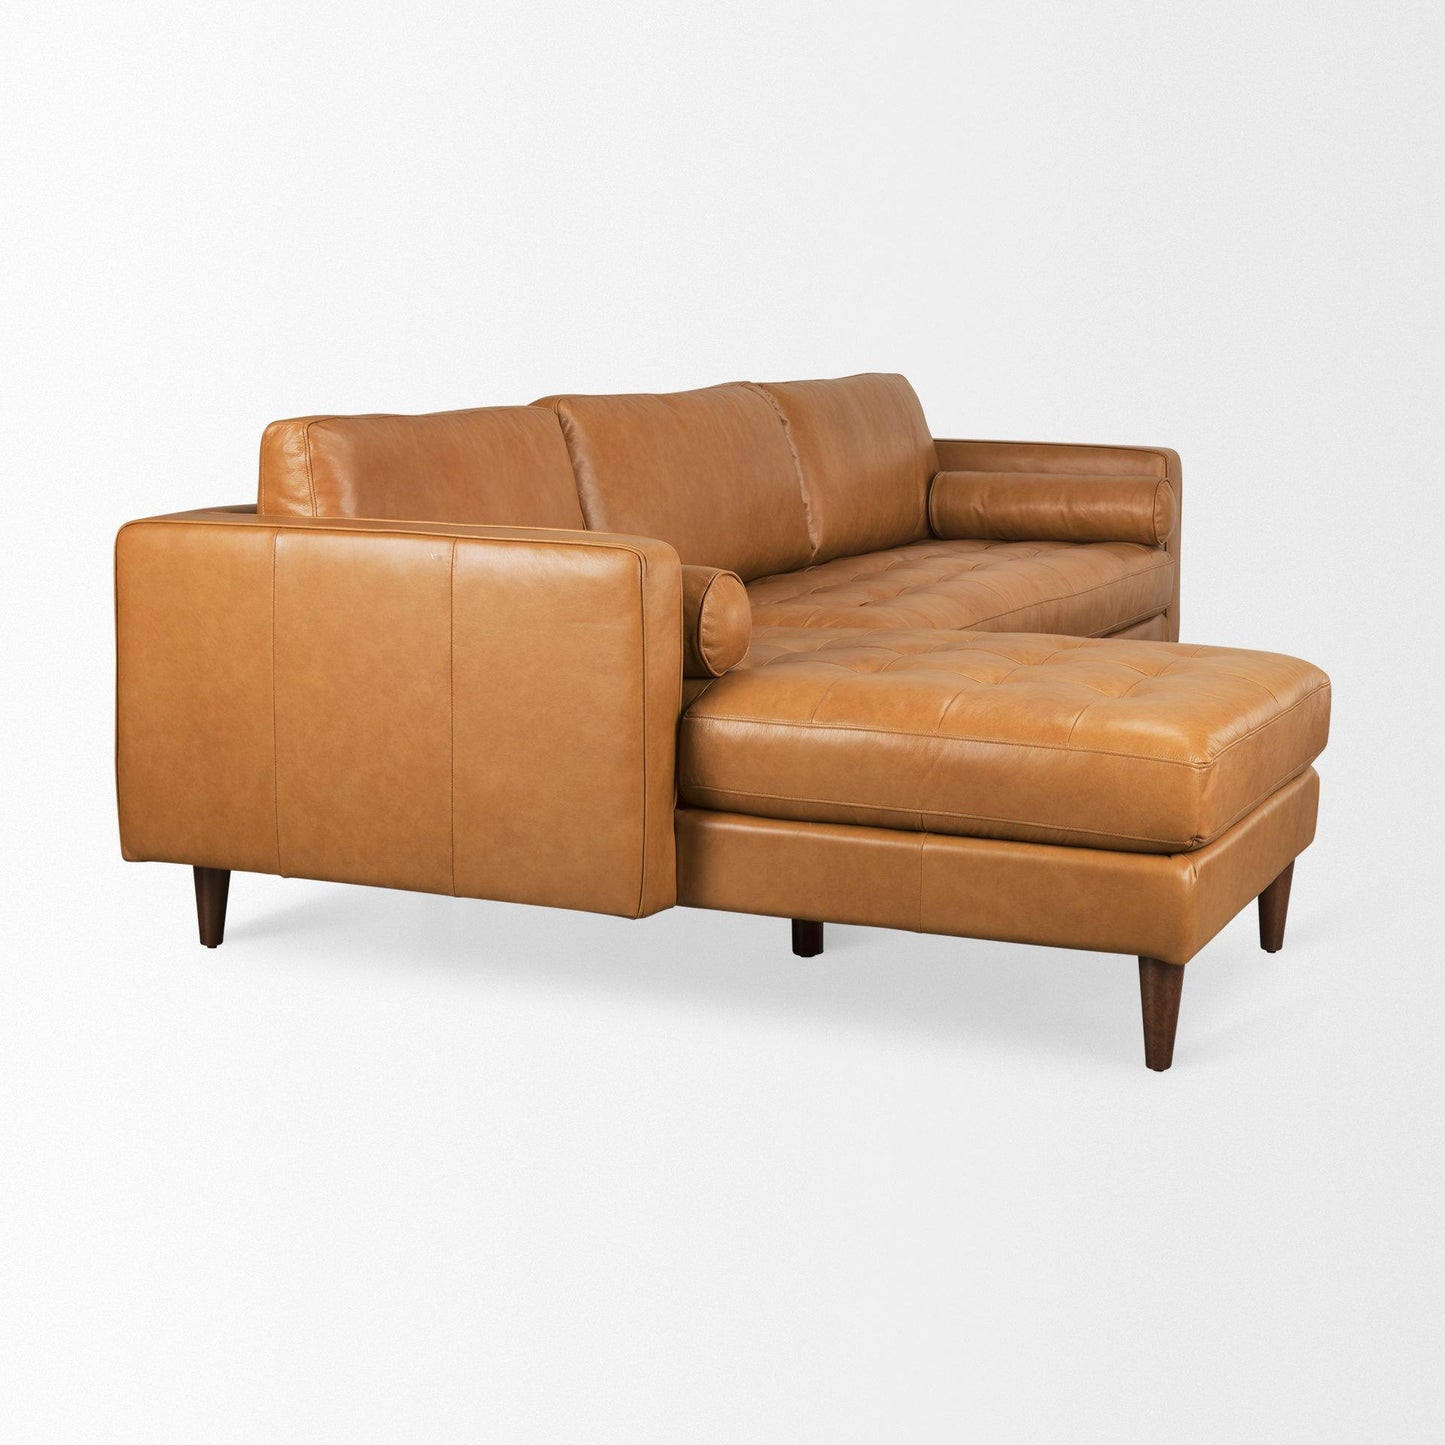 Svend 111.4L x 68.0W x 33.9H Tan Leather Left Chaise Sectional Sofa